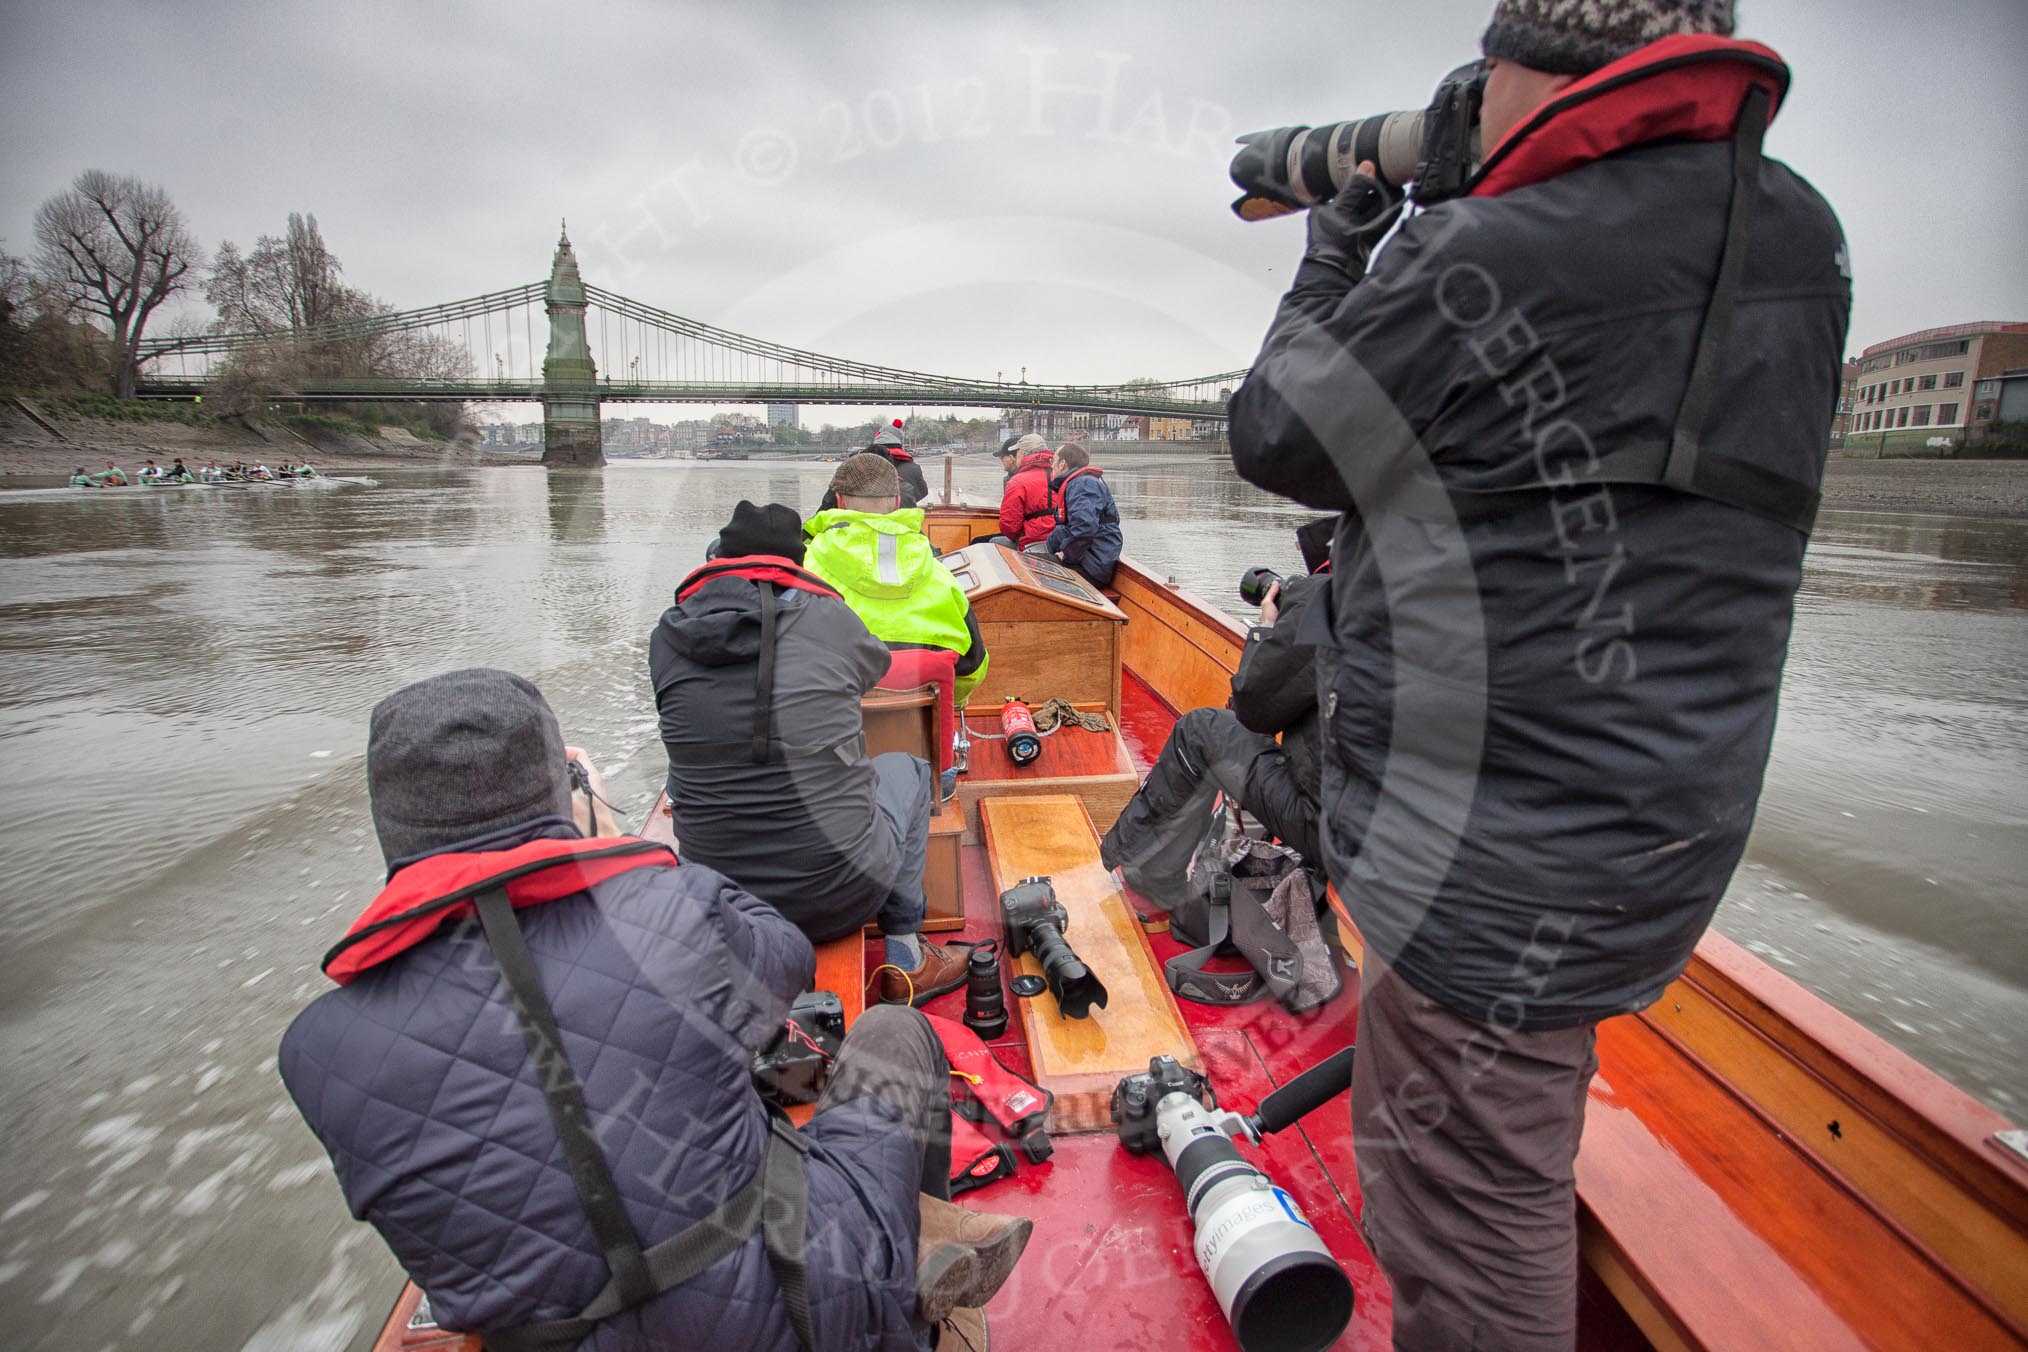 A press launch on the River Thames approaching Hammersmith Bridge, following the Cambridge University Boat Club Blue Boat.